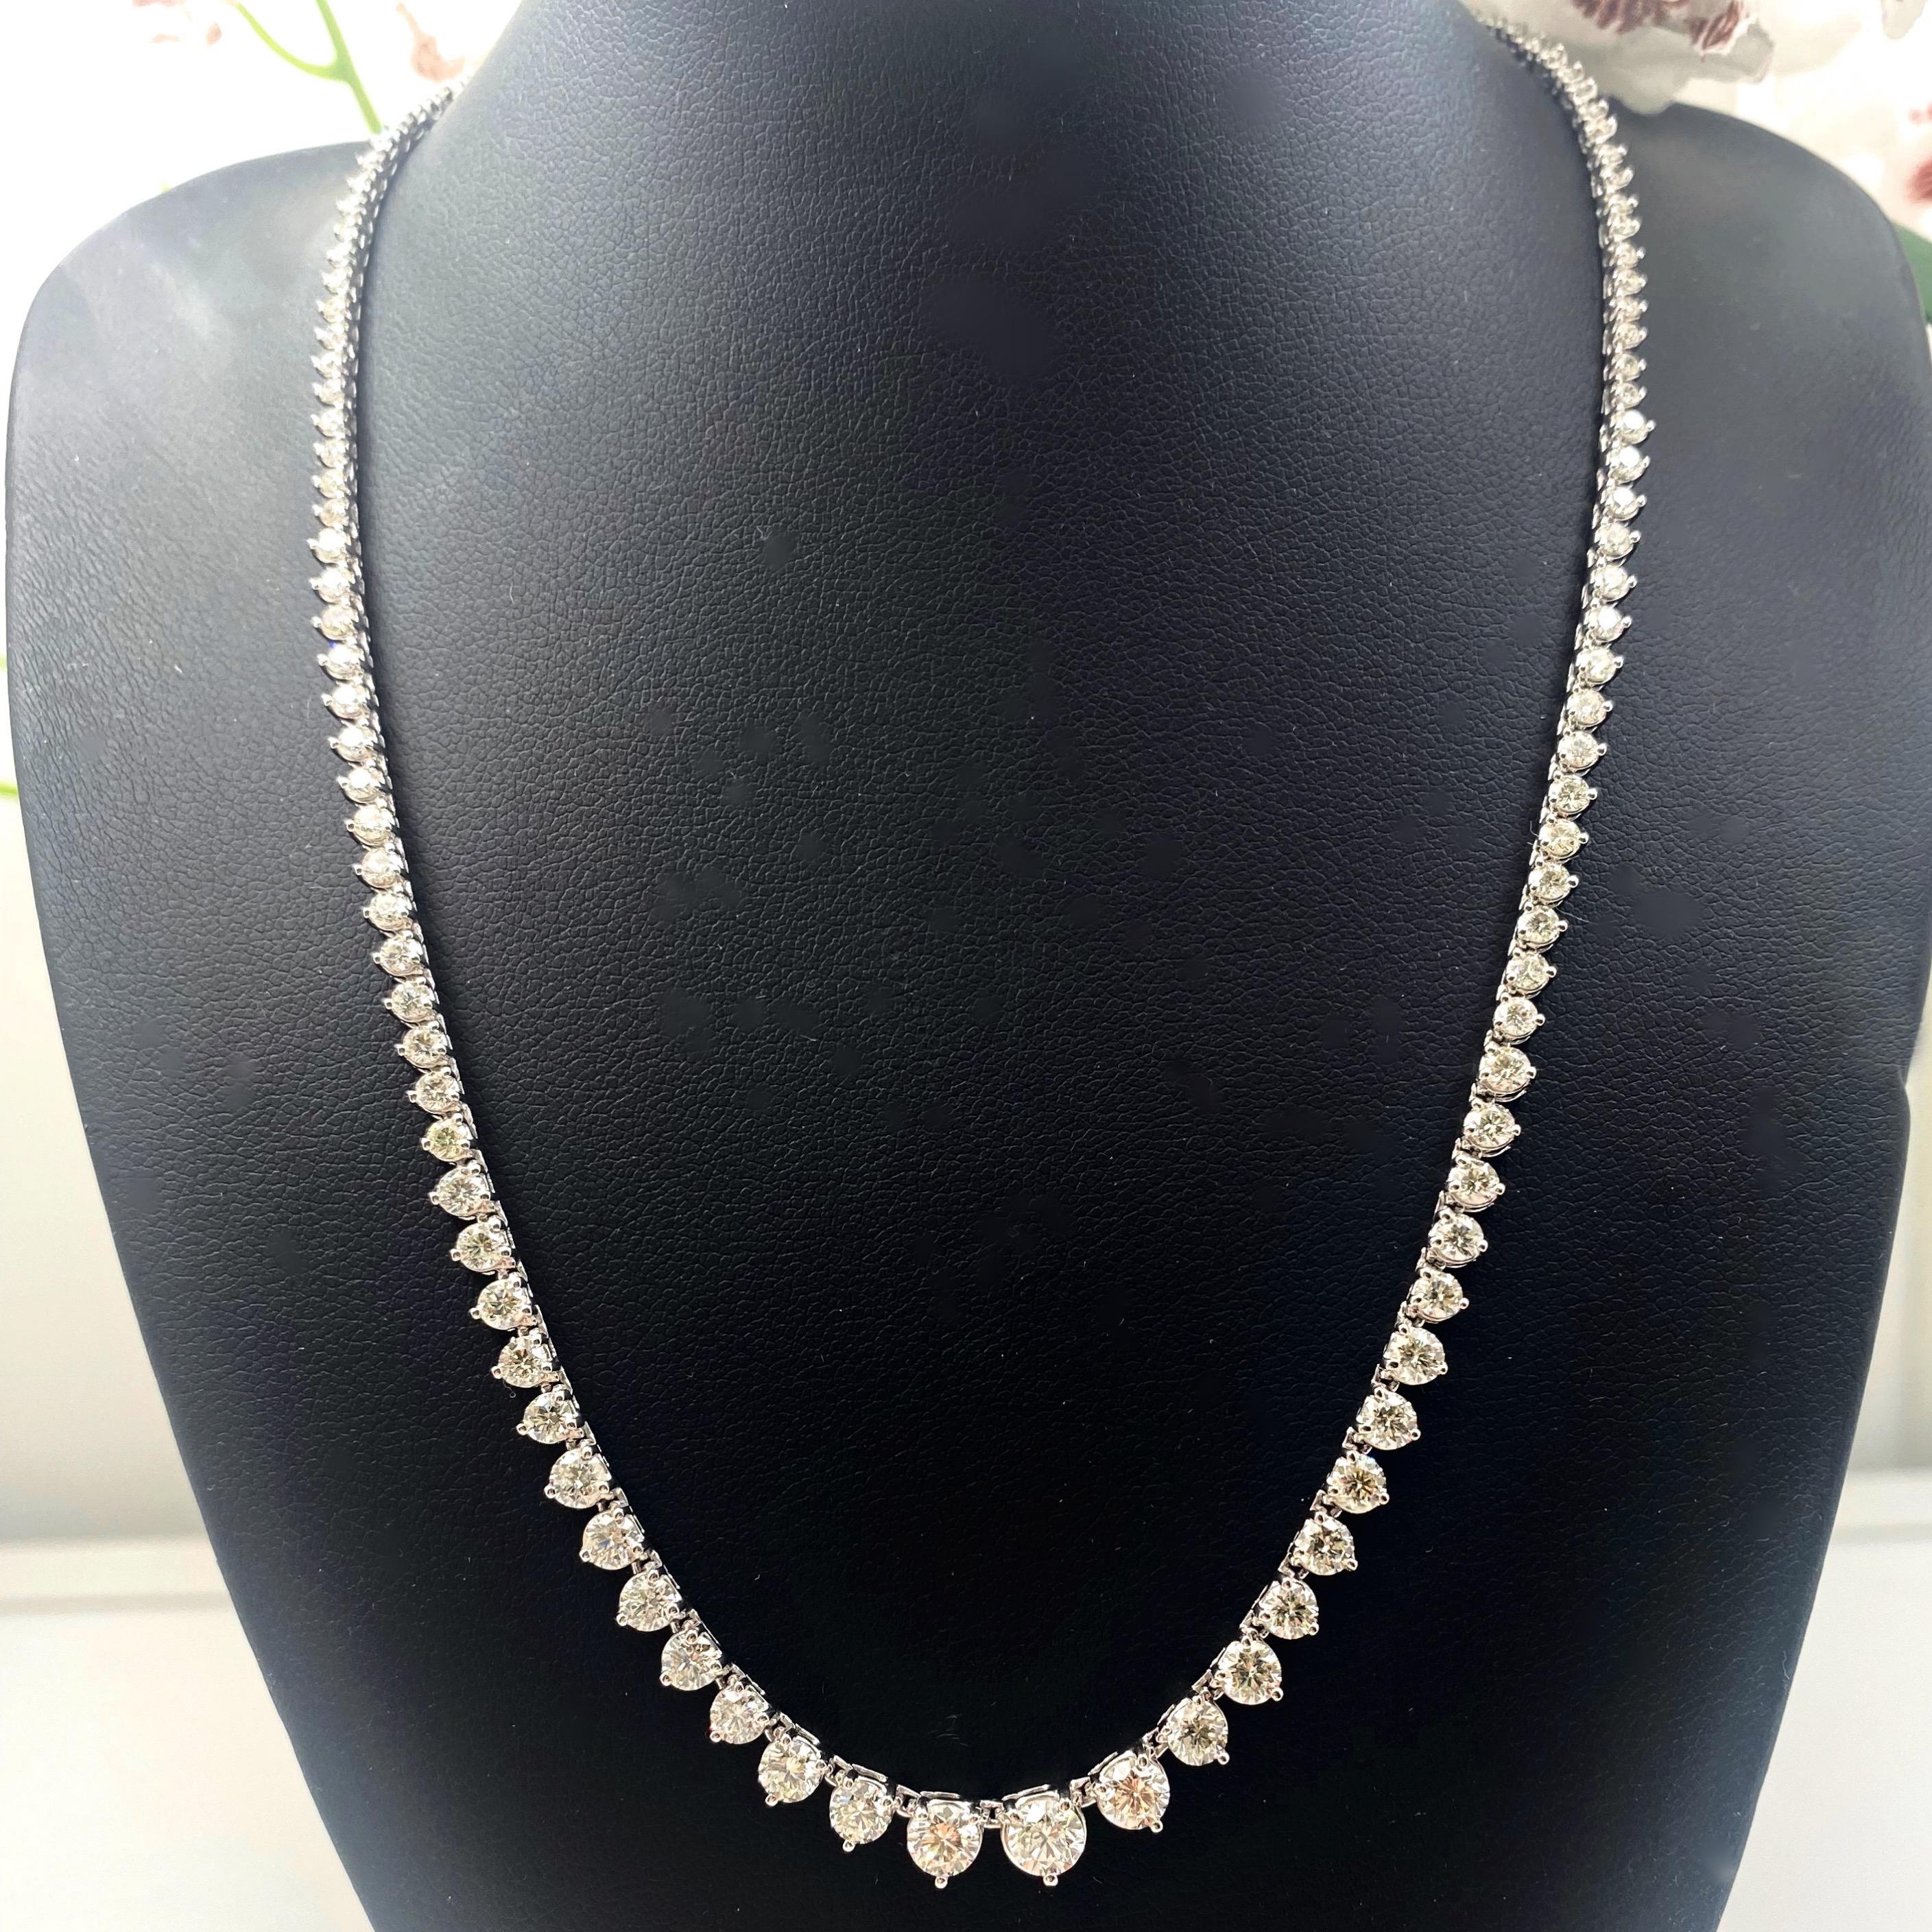 Diamond Riviera Necklace 7.00 tcw in 14kt White Gold 4